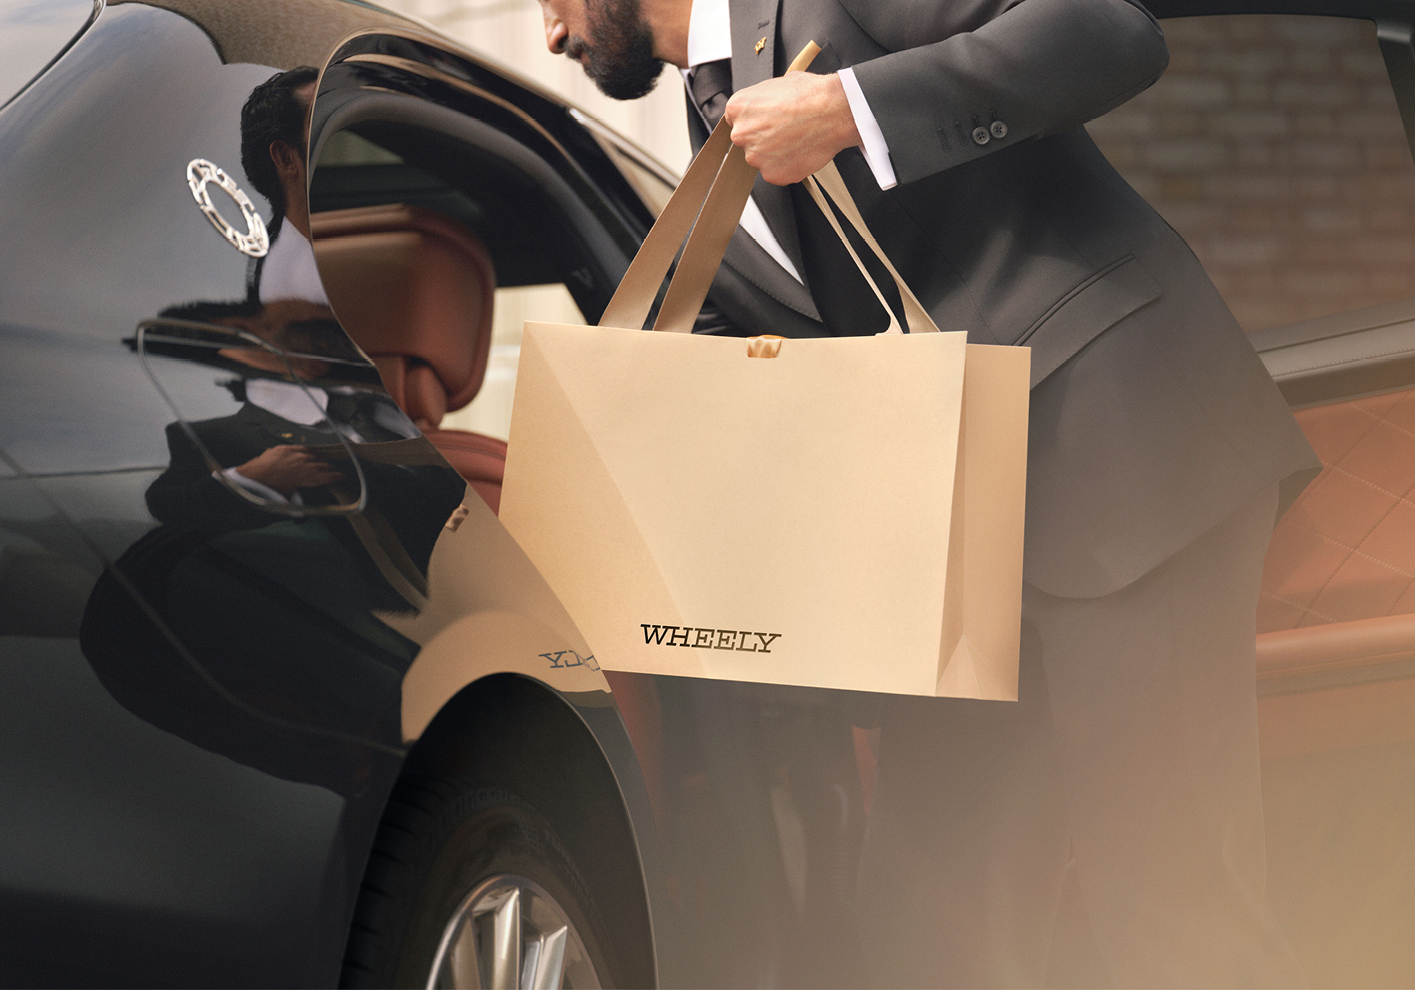 Wheely sets the highest standards for service, safety, etiquette and discretion, with every chauffeur being trained at the Wheely Chauffeur Academy